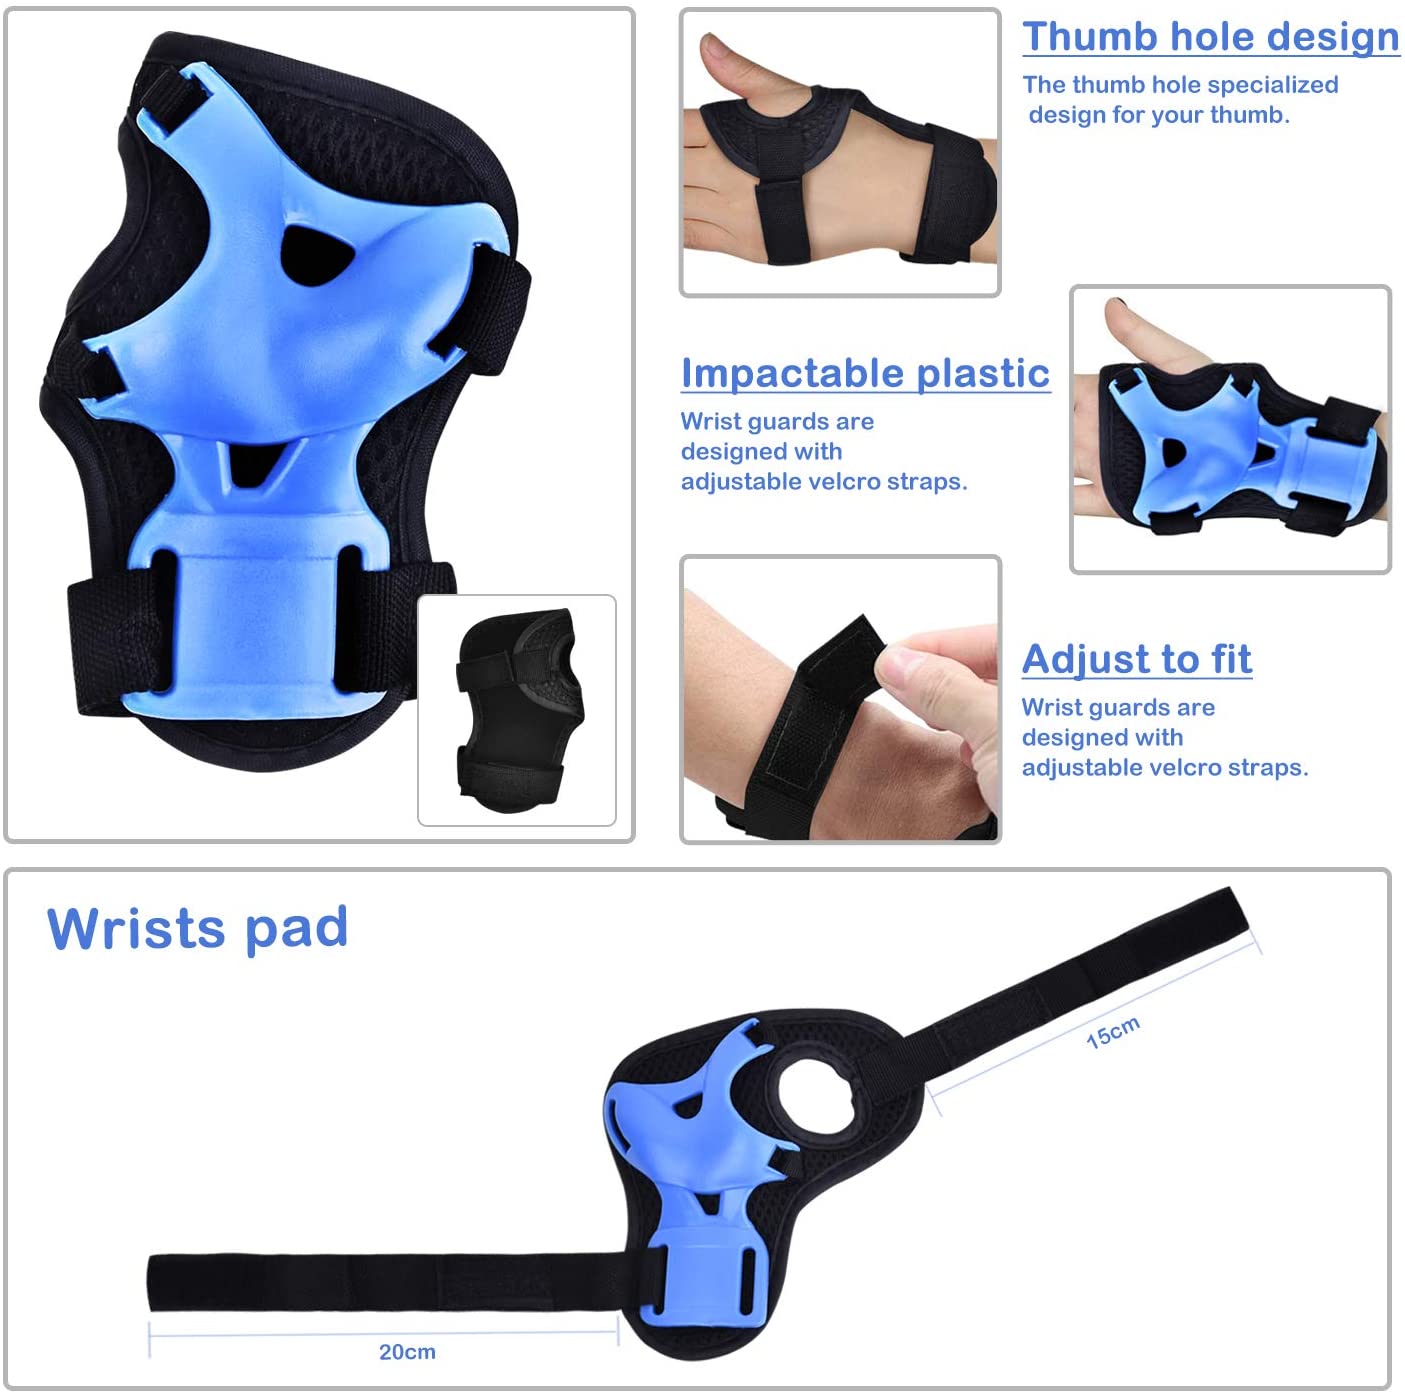 7Pcs-Elbow-Knee-Wrist-Protective-Guard-Elbow-Pads-Safety-Gear-Pad-Wrist-Guard-Skateboard-Protective--1781562-9